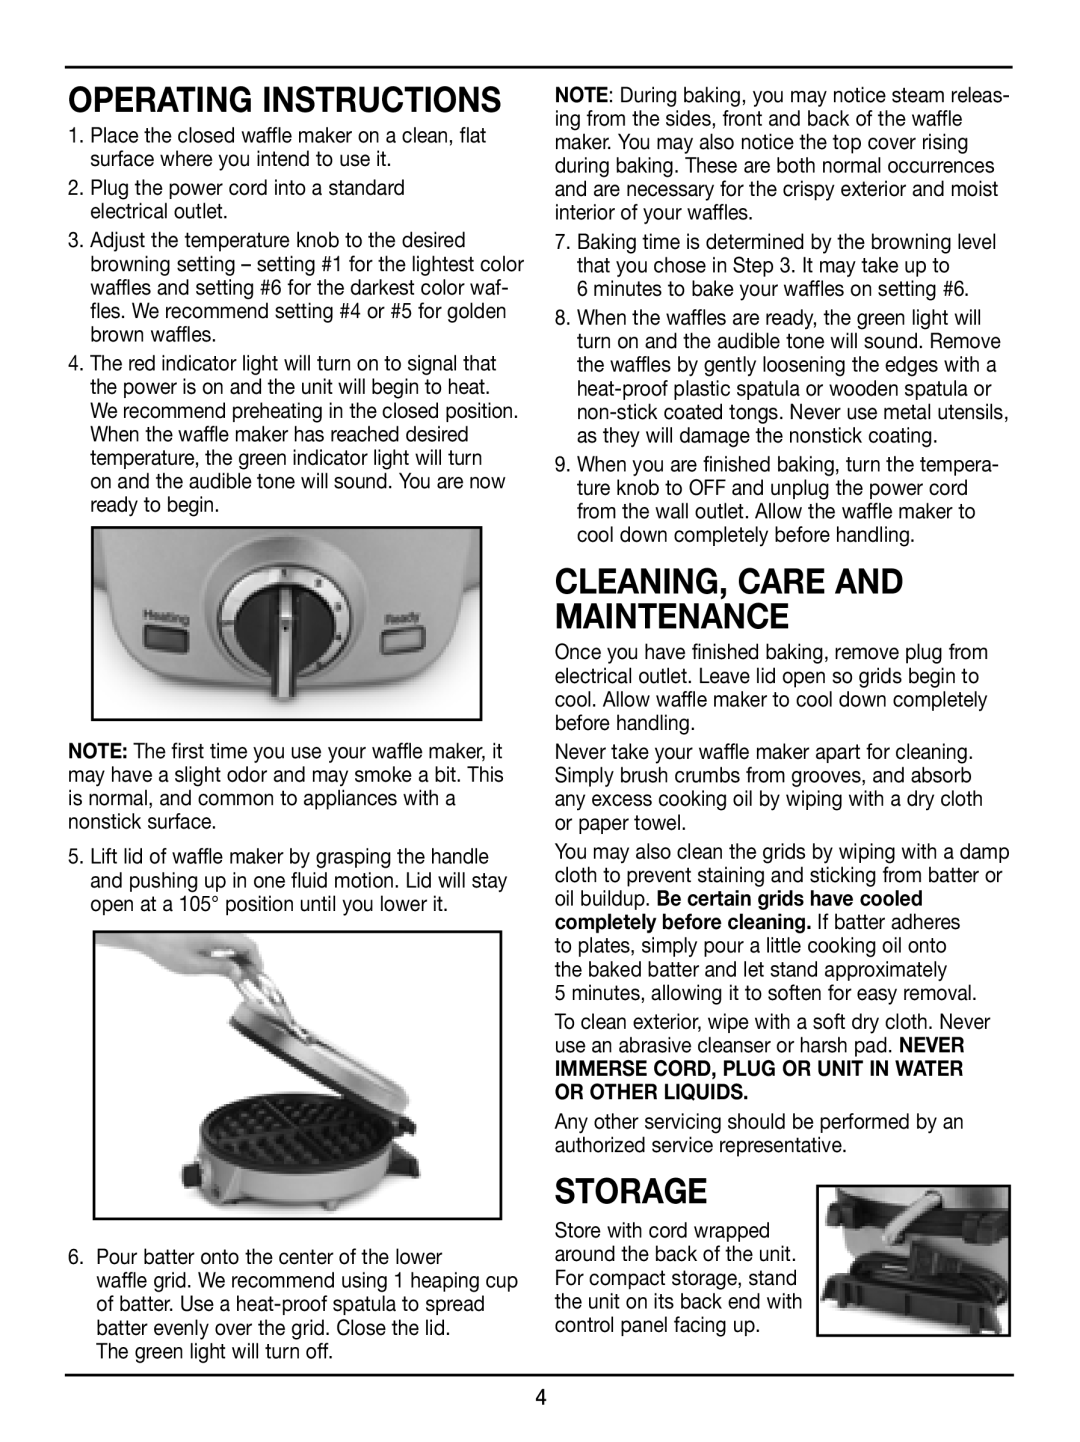 Cuisinart WAF-2OO manual Cleaning, Care and Maintenance, Storage, Operating Instructions 